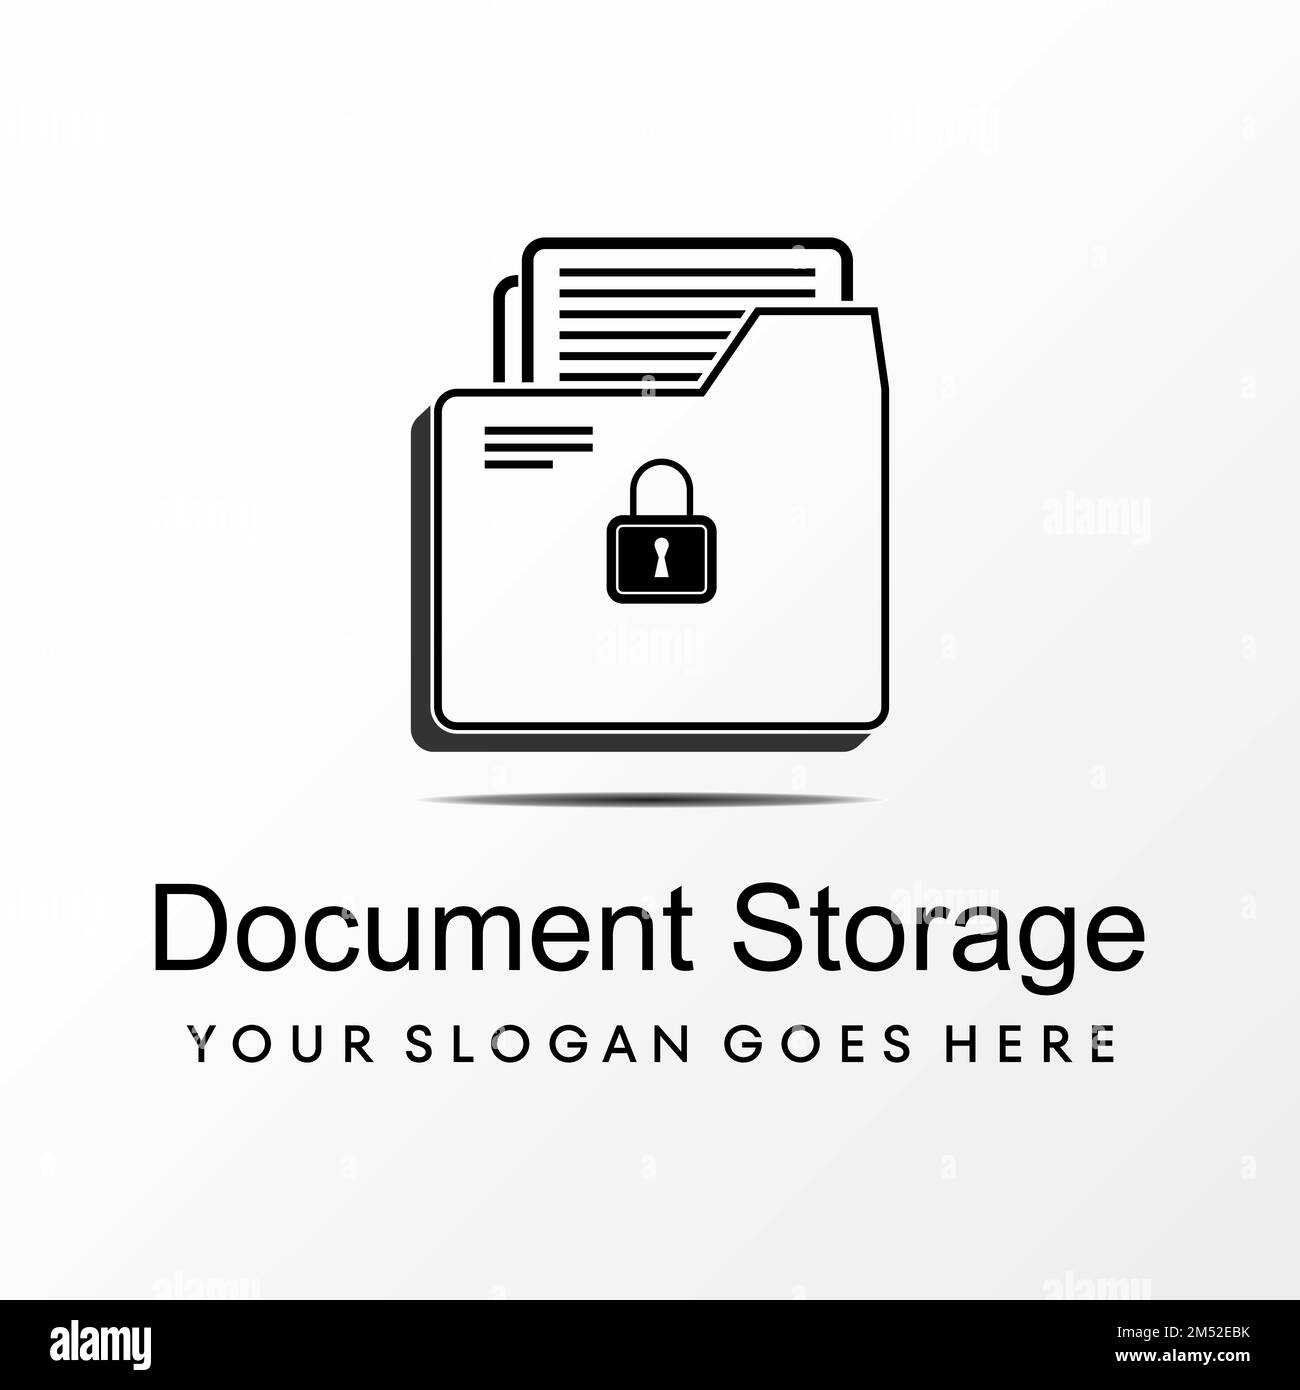 Simple and unique document holder, paper, and padlock key image graphic icon logo design abstract concept vector stock. related to office or security. Stock Vector